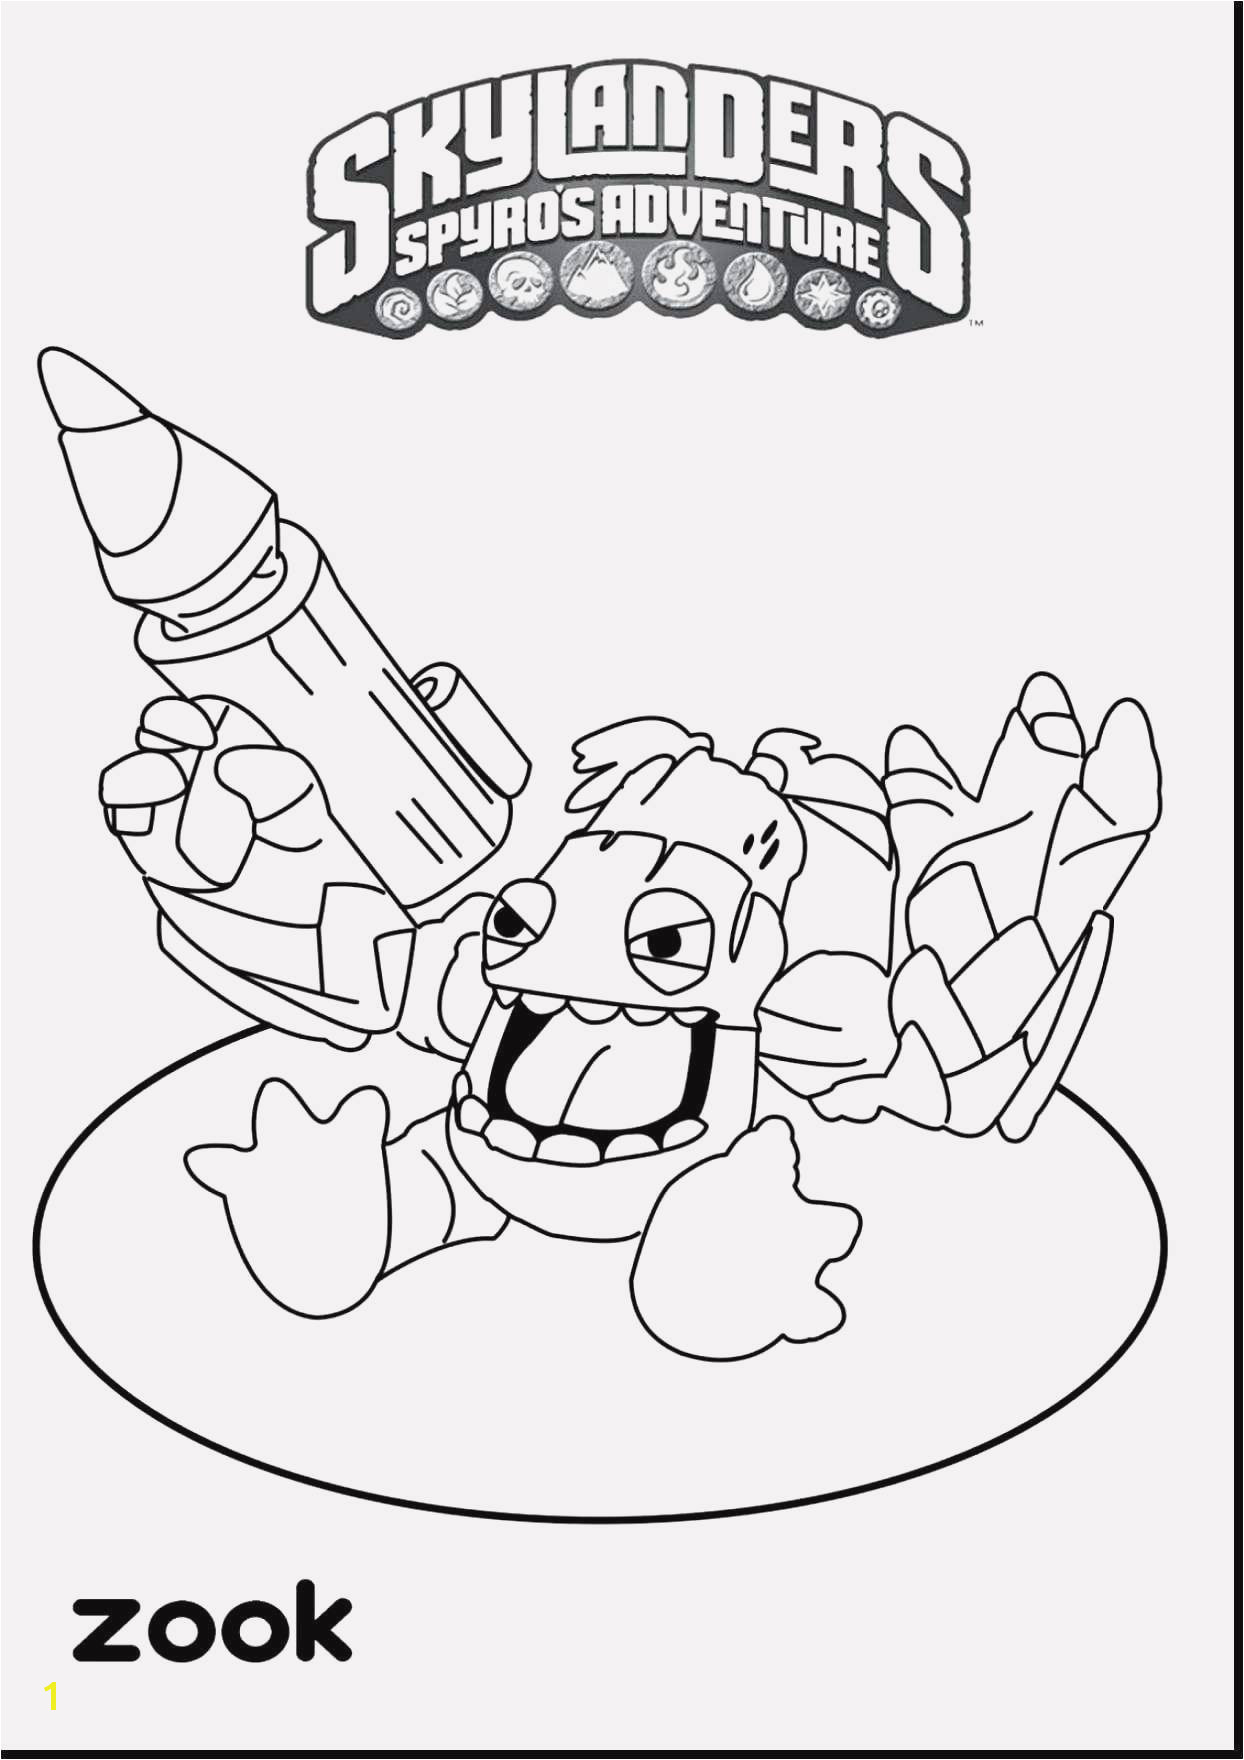 Cool Coloring Page Inspirational Witch Coloring Pages New Crayola Pages 0d Coloring Page Crayola Printable